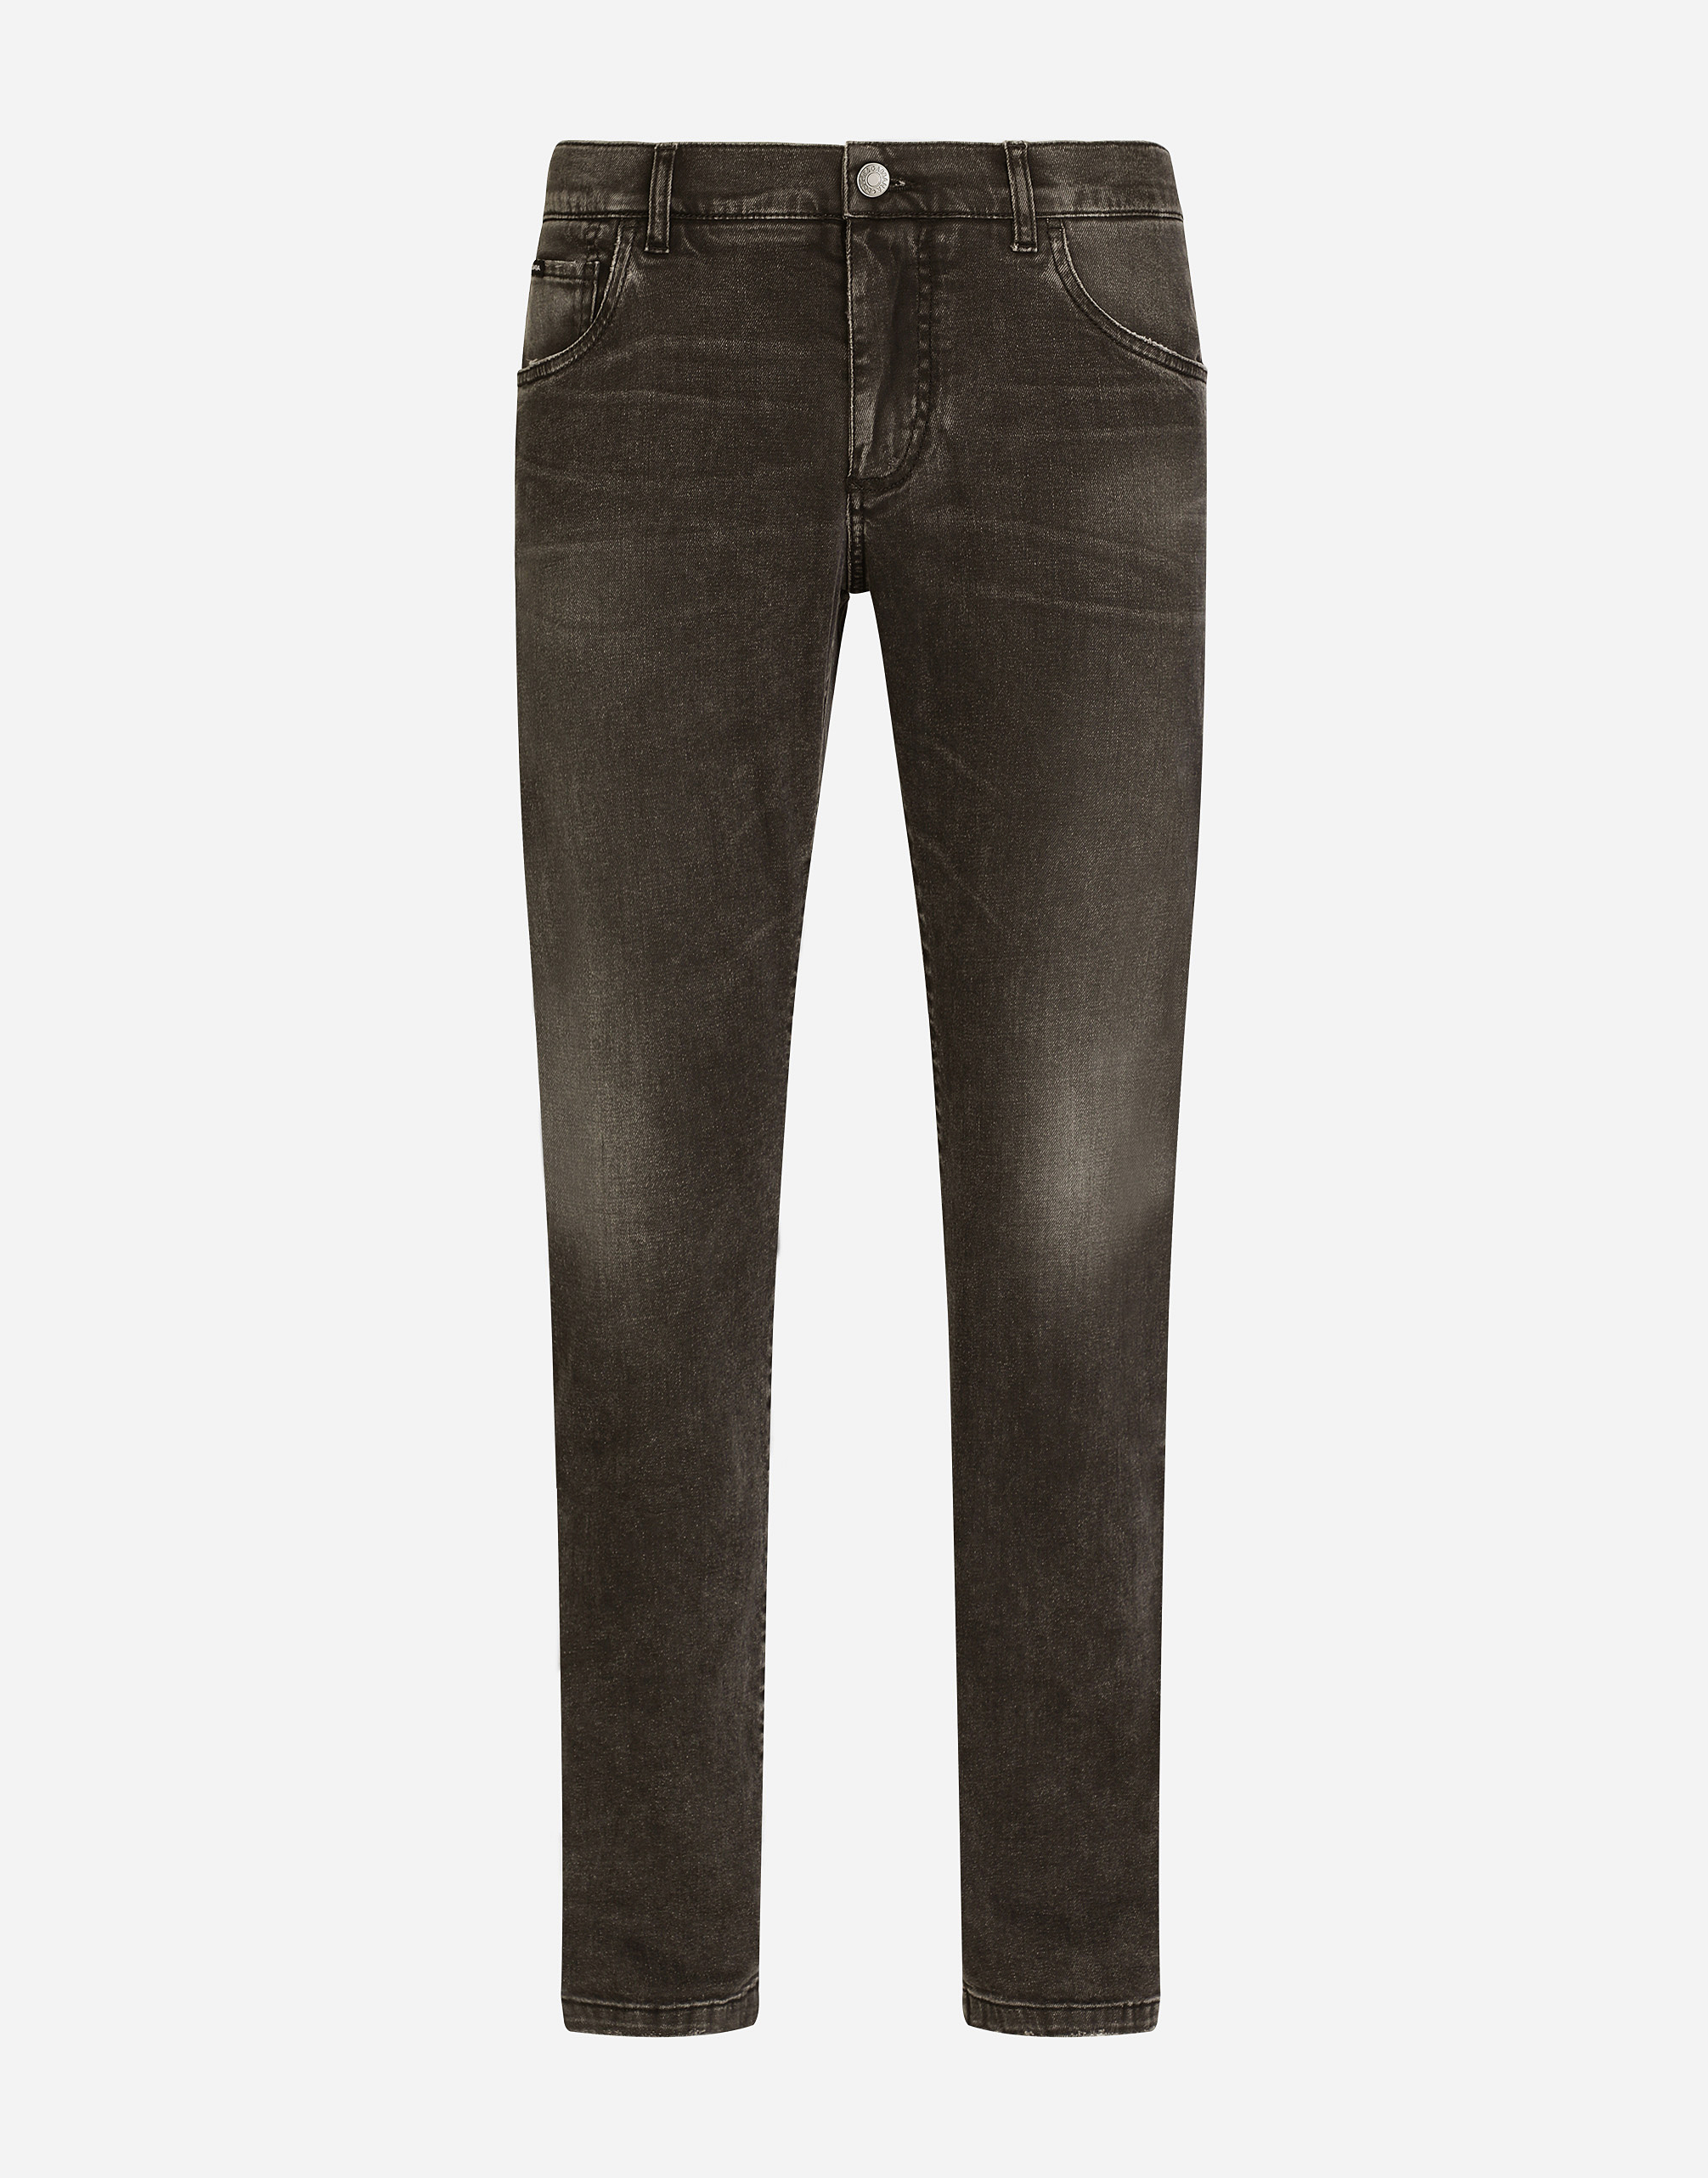 Gray wash slim-fit stretch jeans in Grey